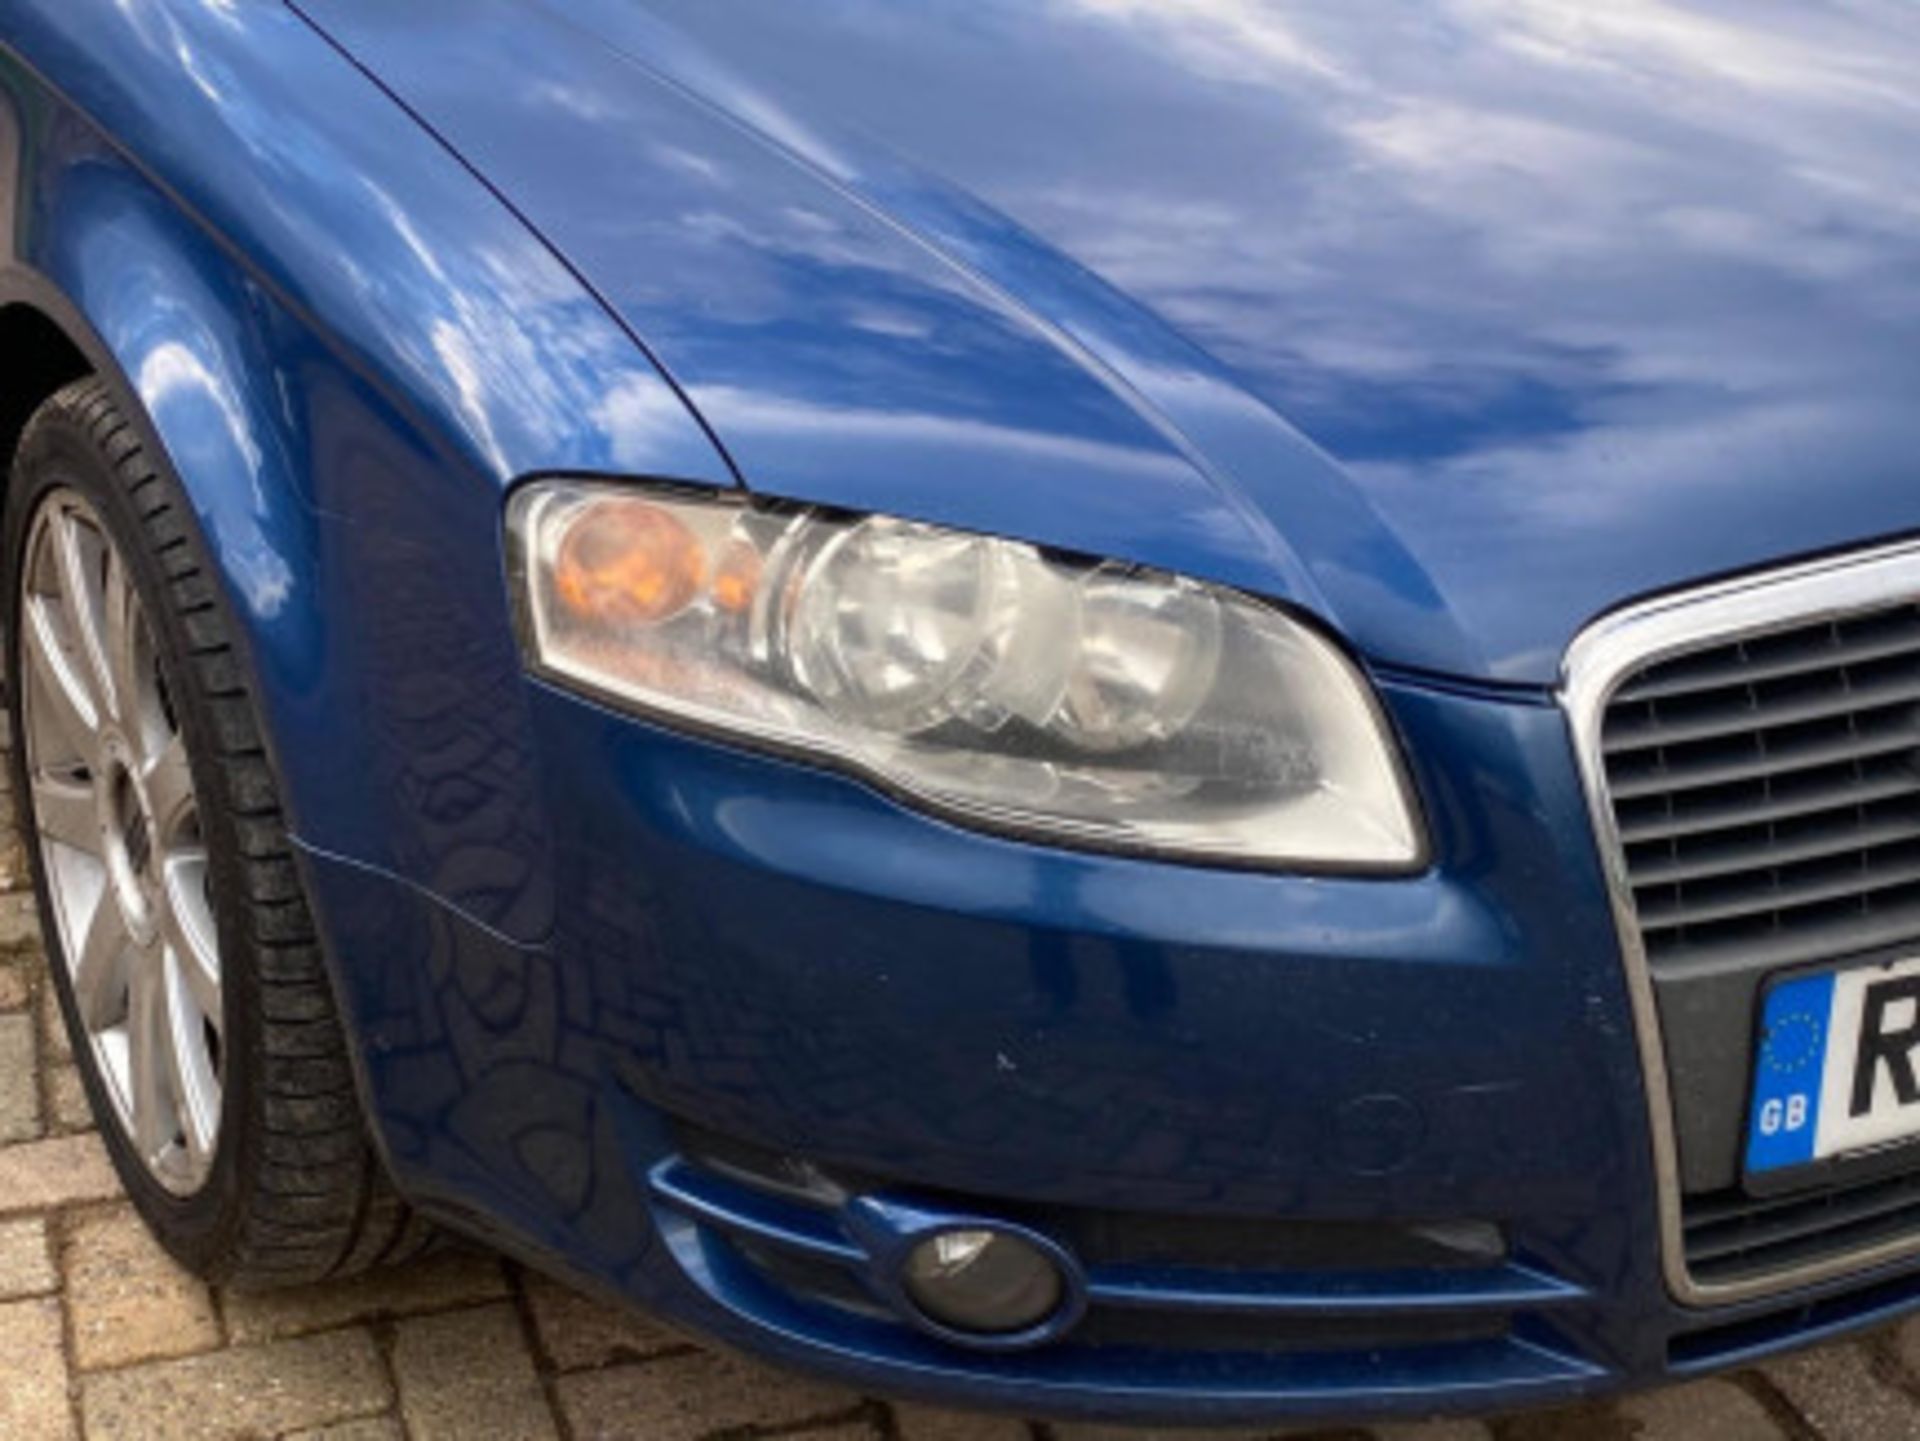 AUDI A4 AVANT 1.9 TDI SE 5DR ESTATE - RARE AND RELIABLE LUXURY WAGON >>--NO VAT ON HAMMER--<< - Image 35 of 97